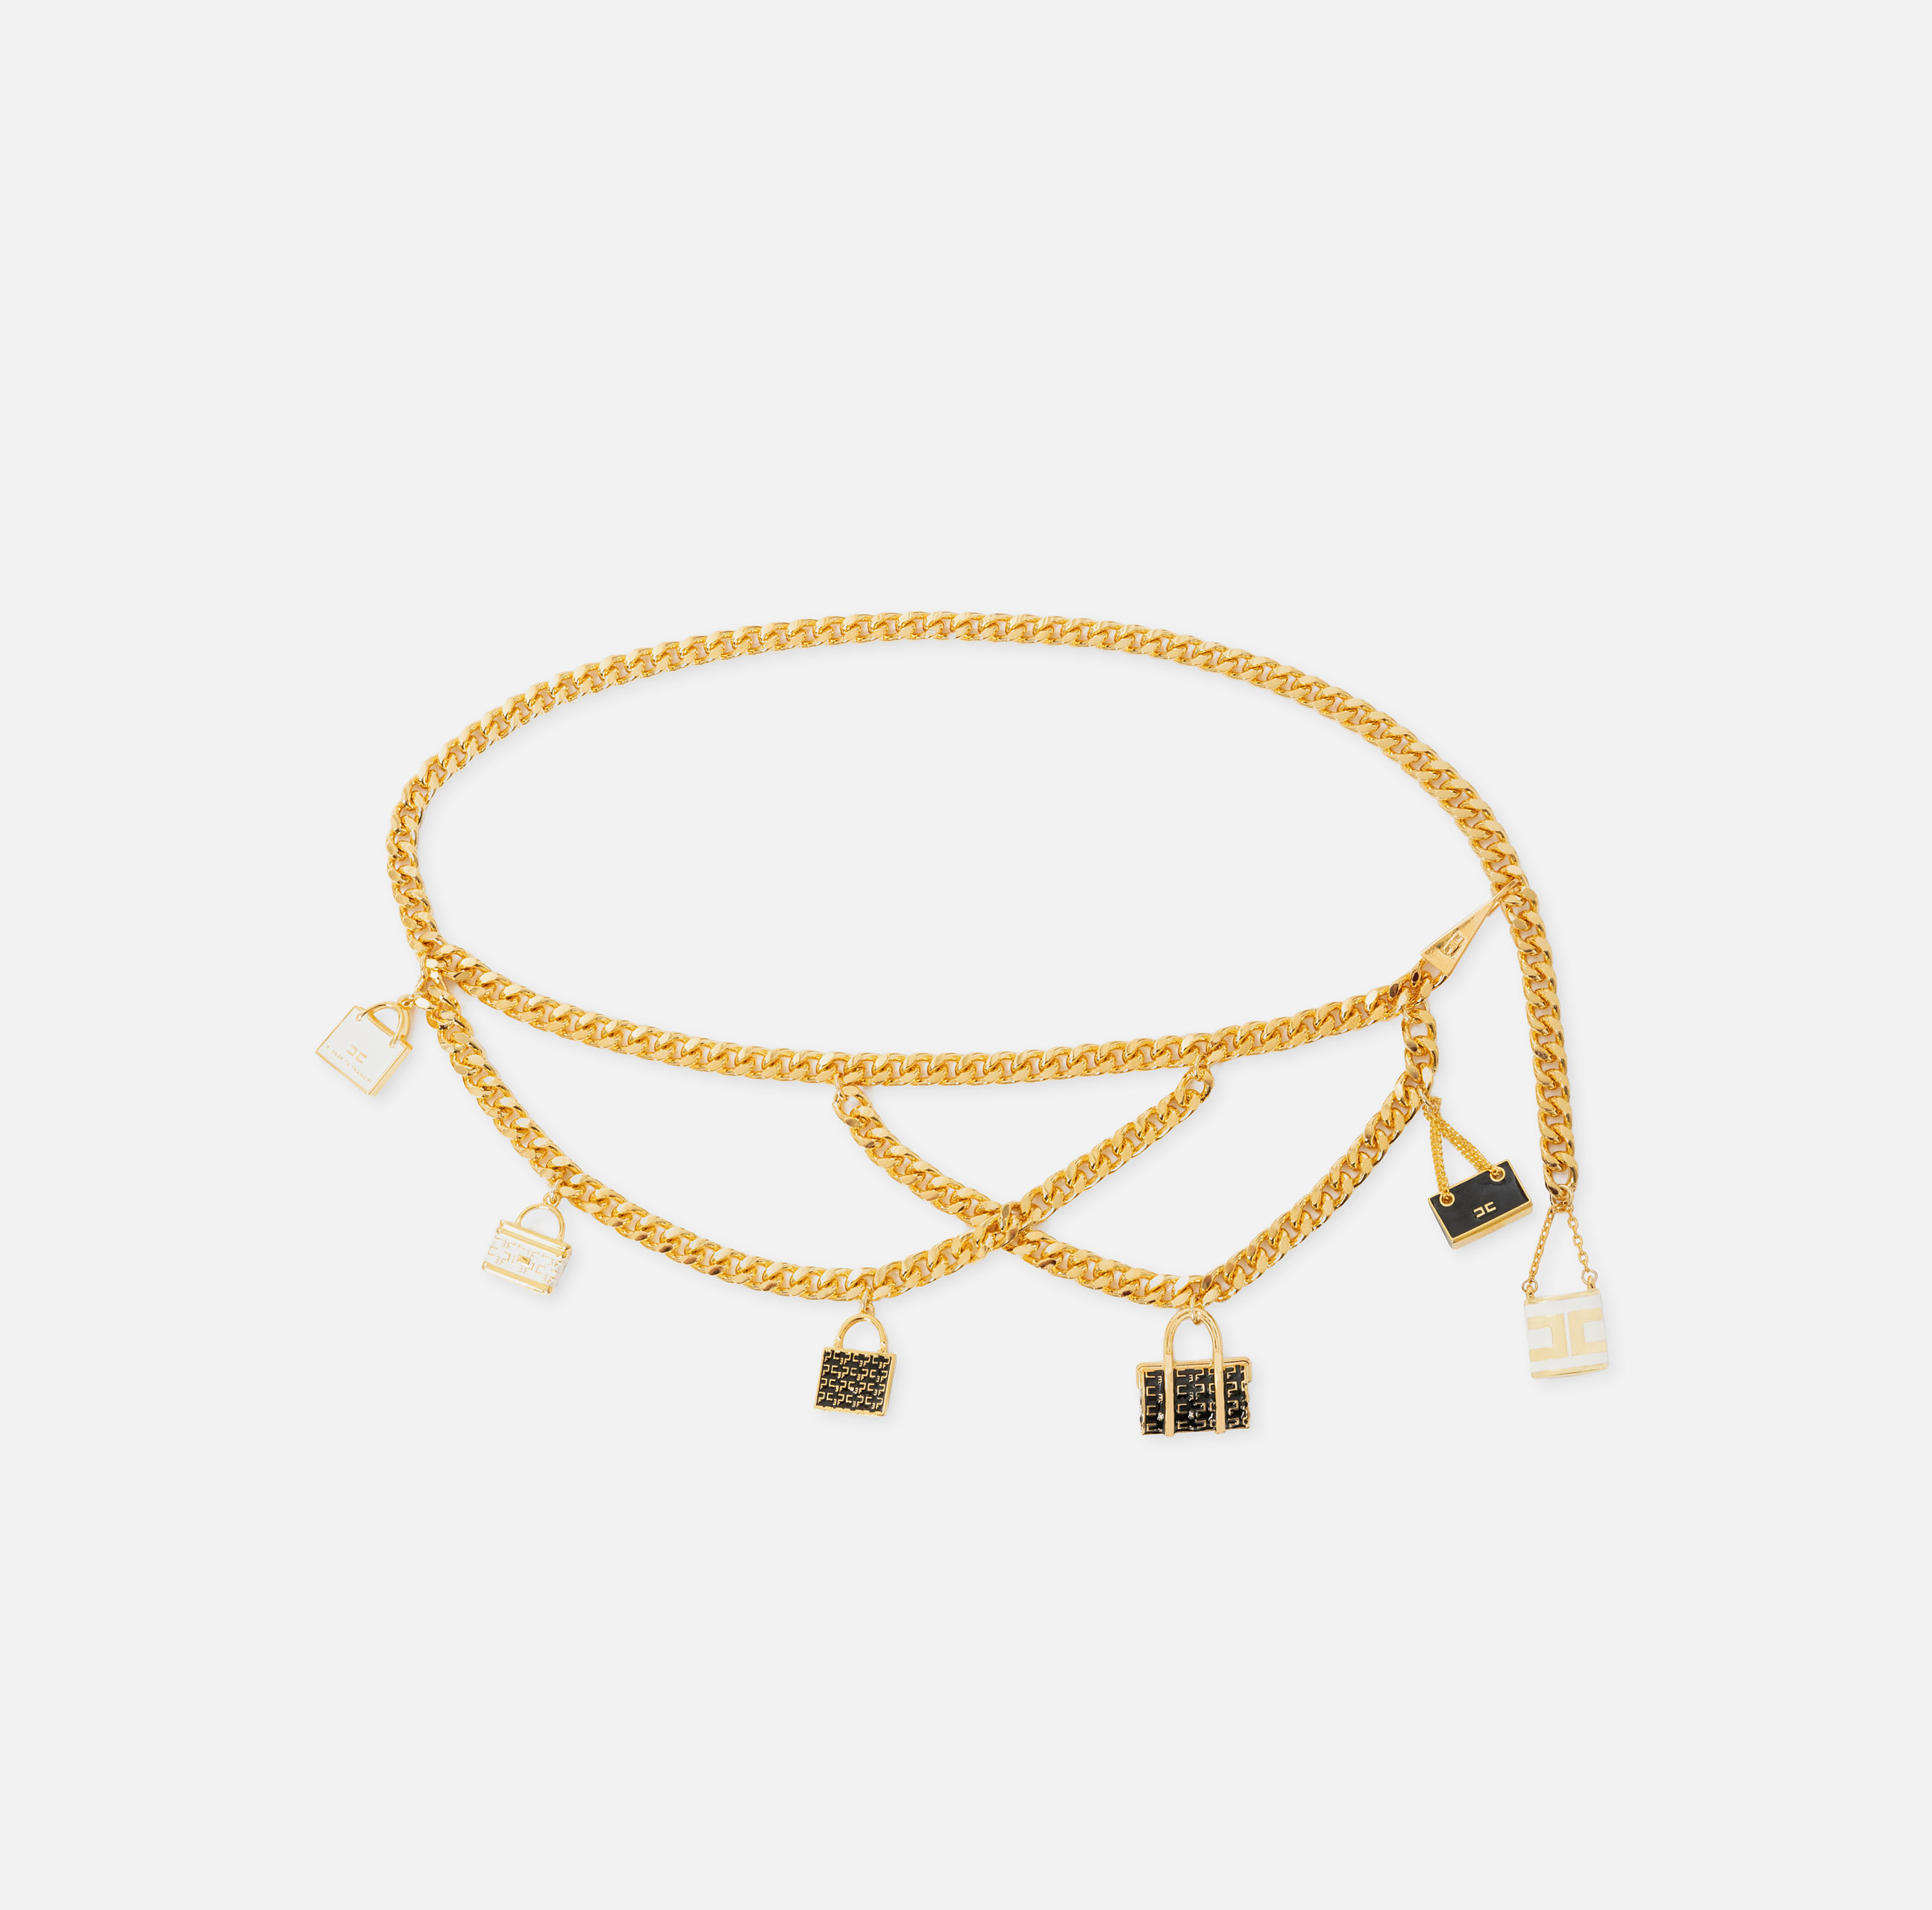 Gold metal chain belt with charms bags - Elisabetta Franchi